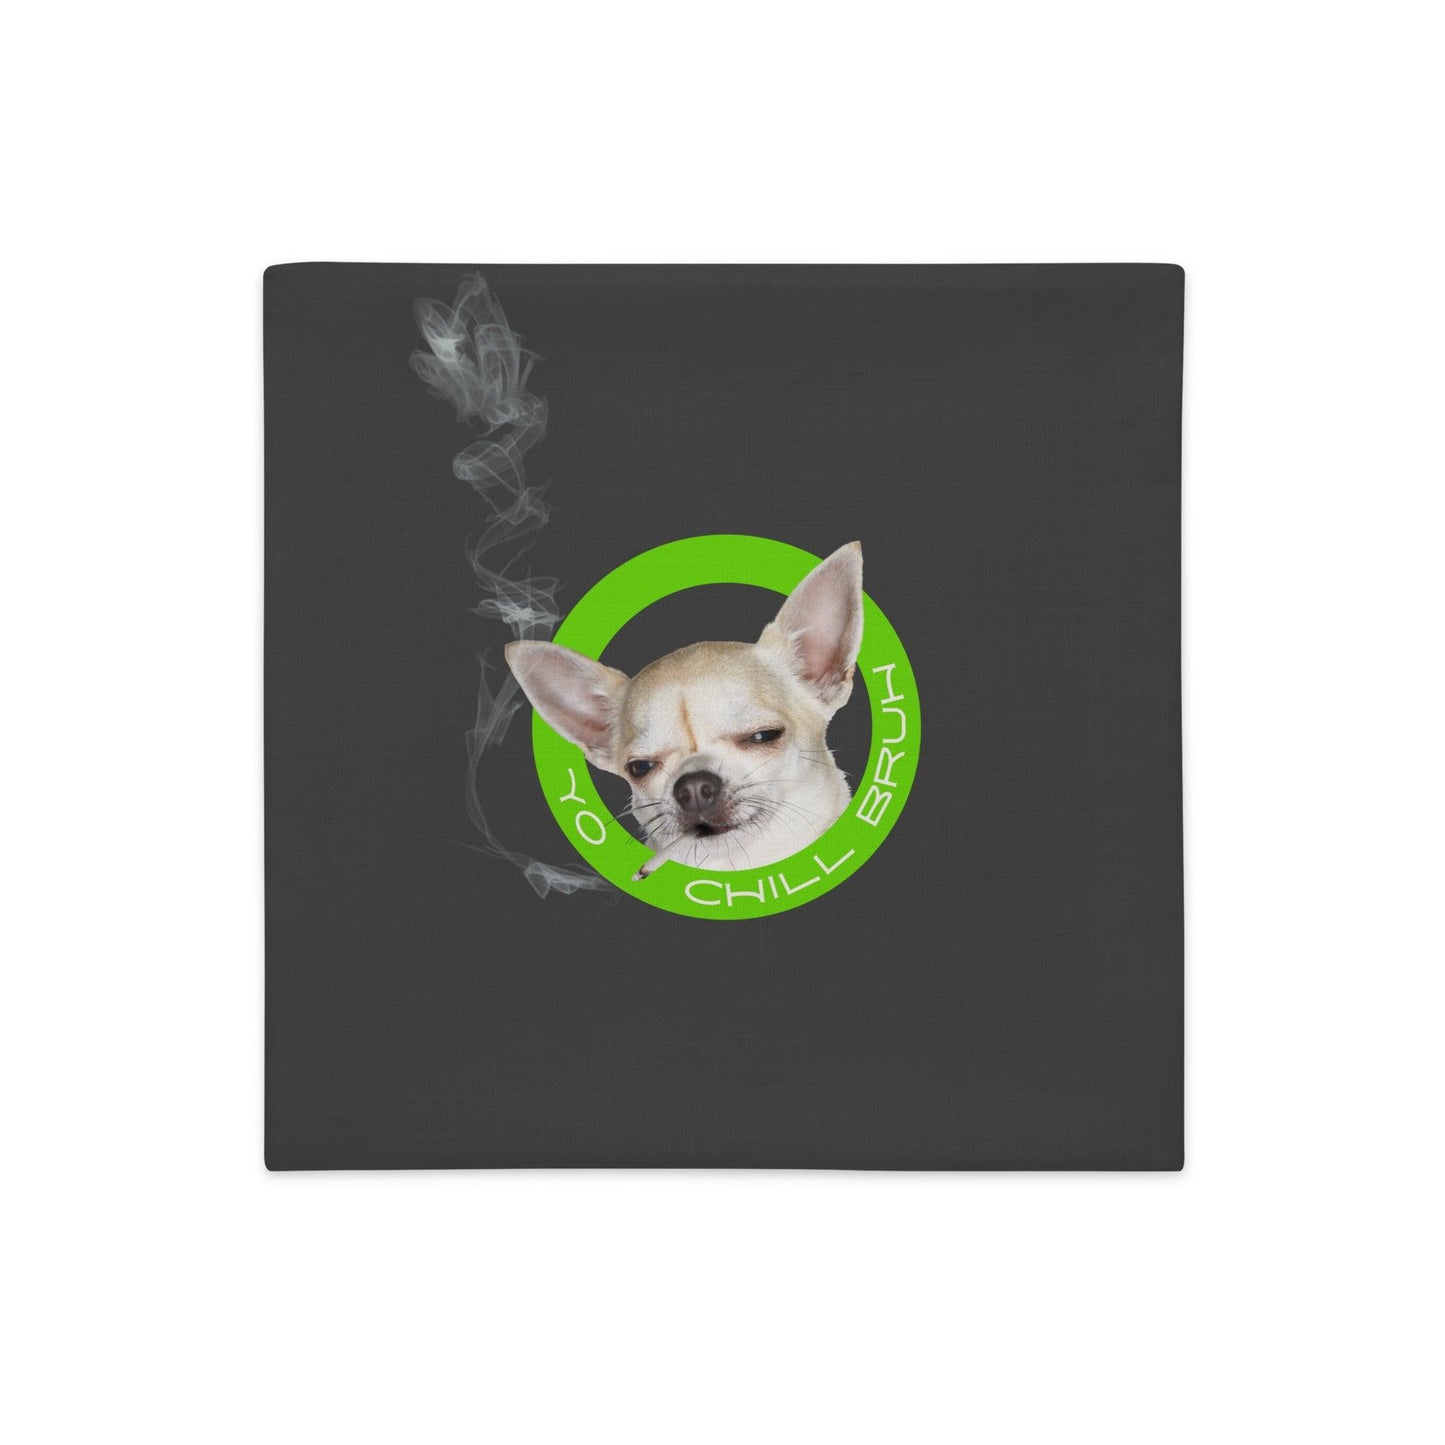 Yo Chill Bruh - very chill chihuahua smoking a cigarette - cool chihuahua meme cushion cover - so funny! Premium linen-feel polyester. Deep dark grey background with vivid print on both sides.